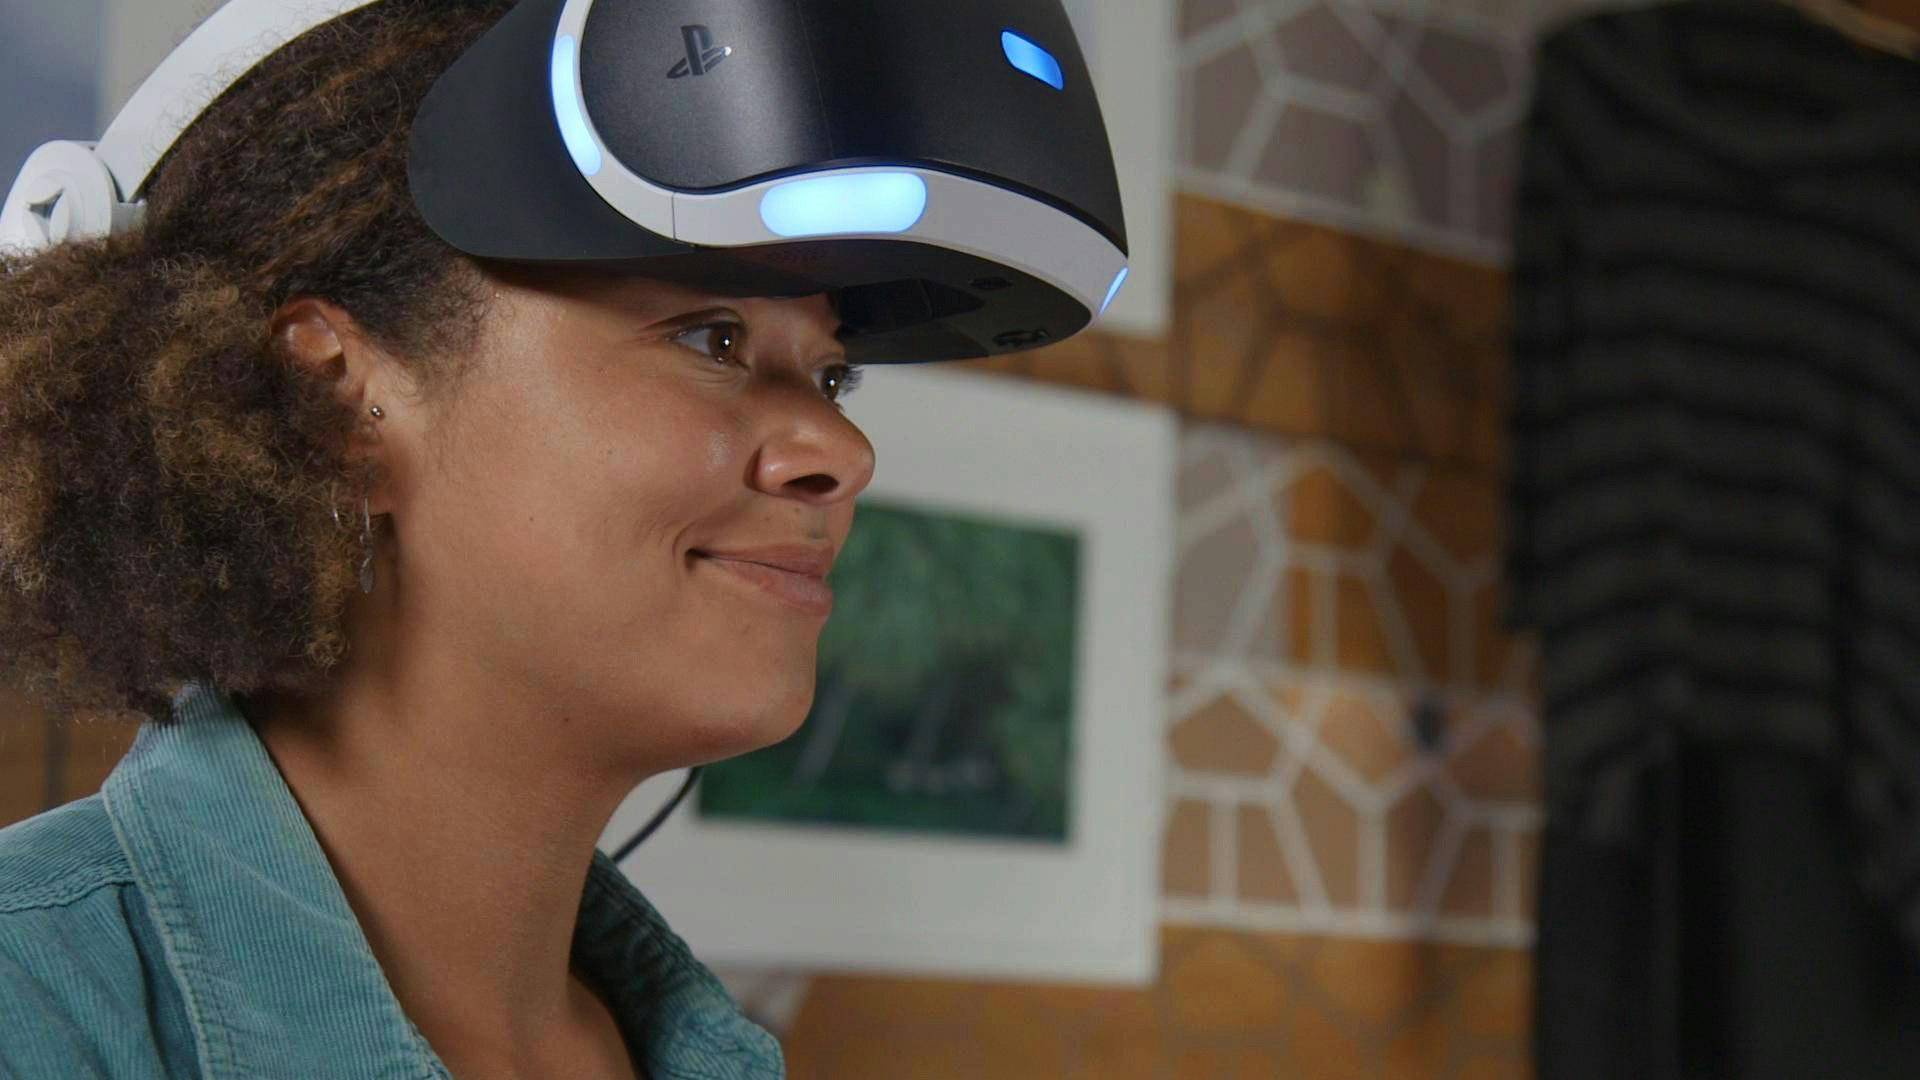 Actor Genny Turay receiving direction from Big Egg during the Futurlab trailer shoot, wearing Sony Playstation VR headset